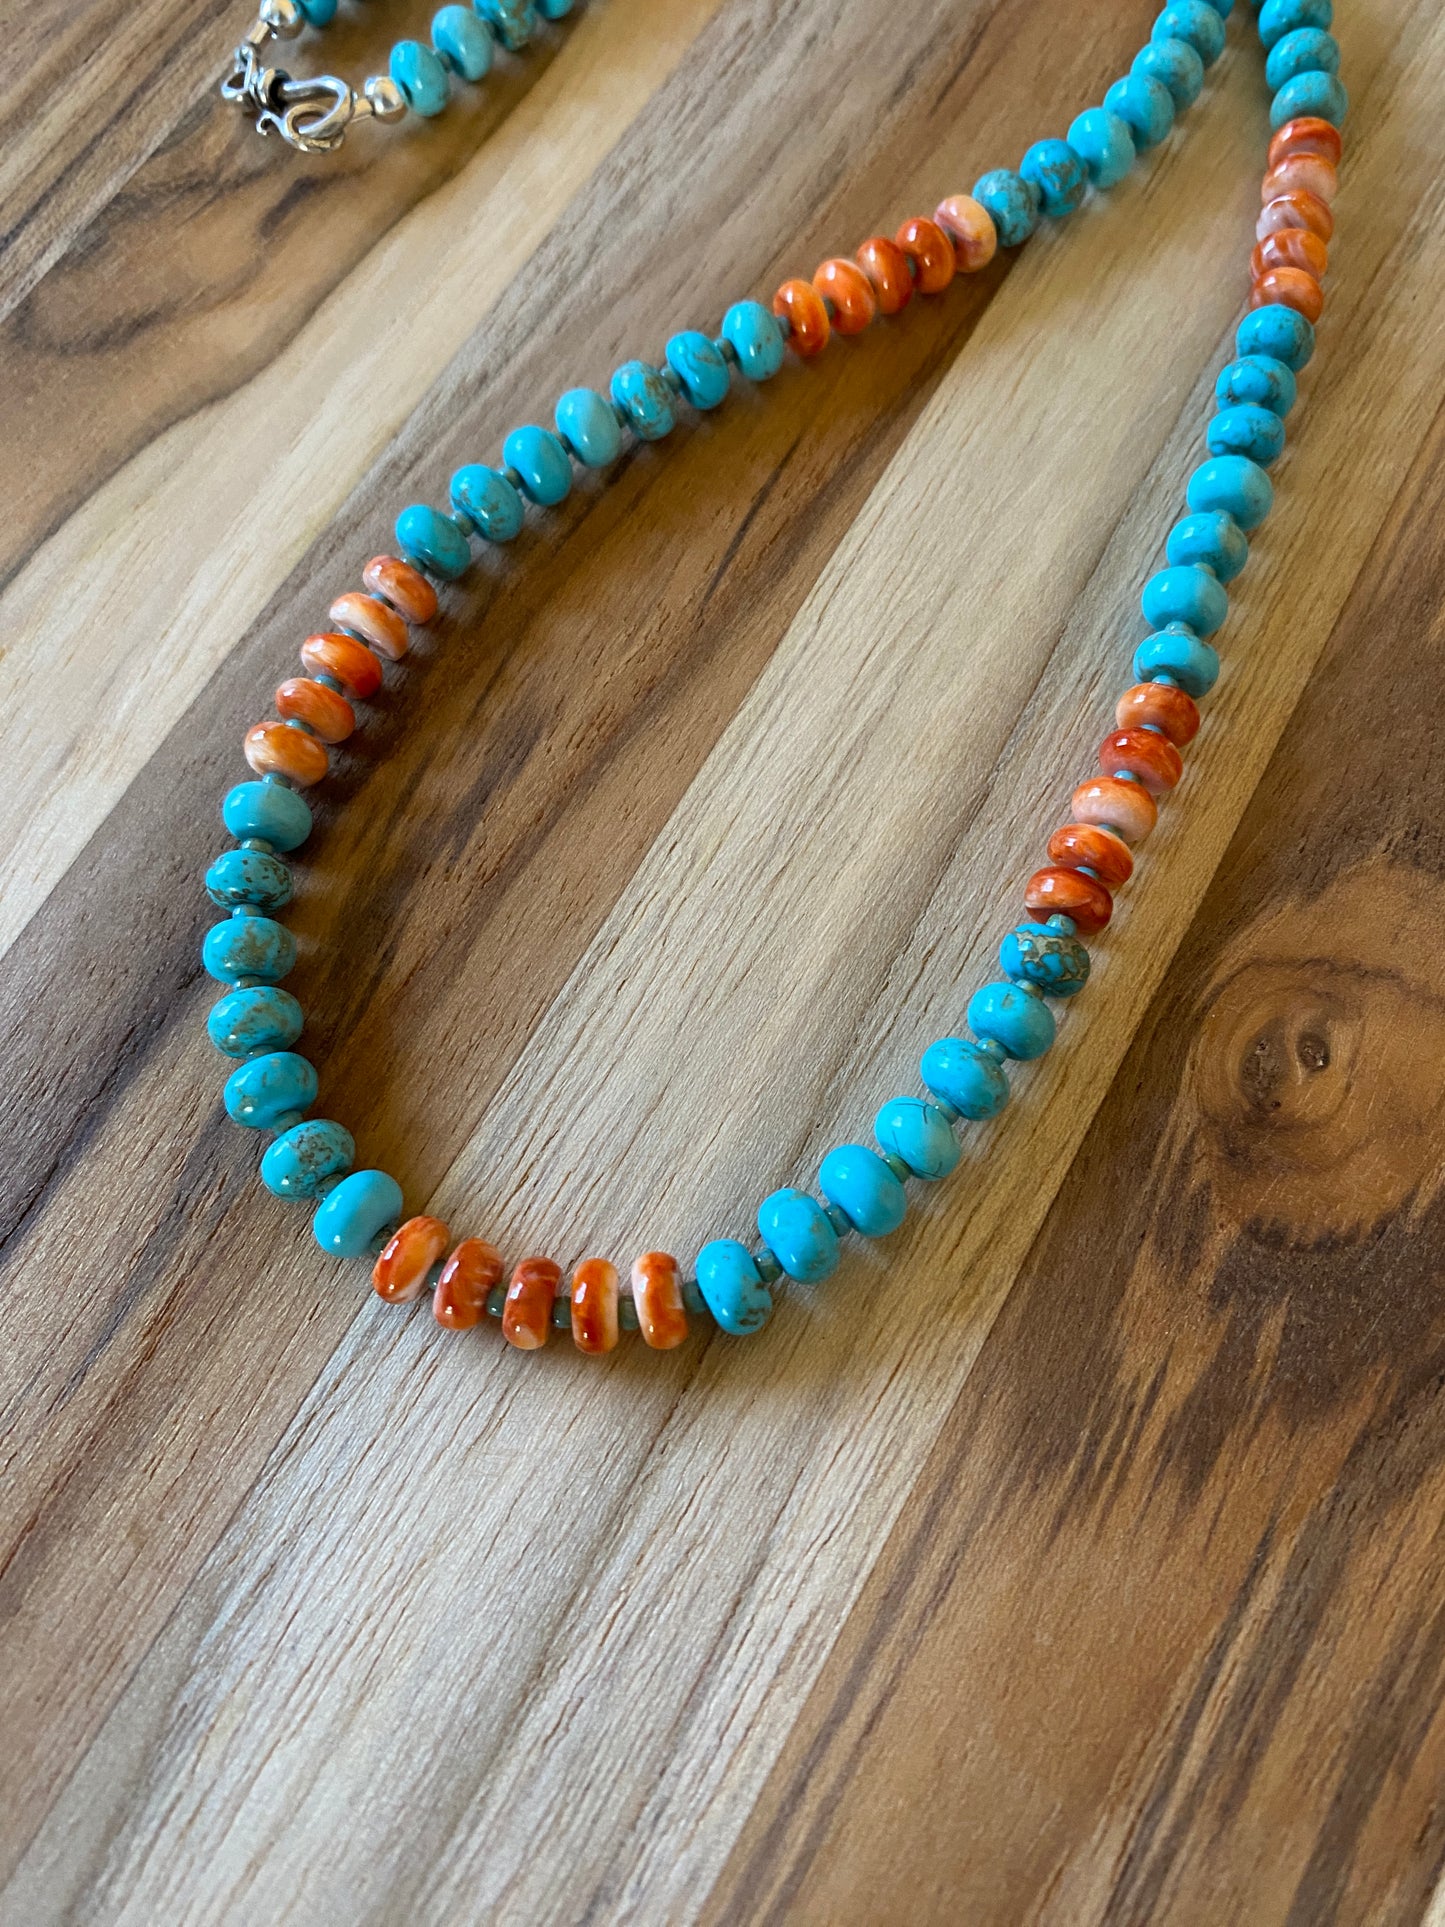 Nevada Blue Turquoise Beaded Necklace with Orange Spiny Oyster and Sterling Silver - My Urban Gems